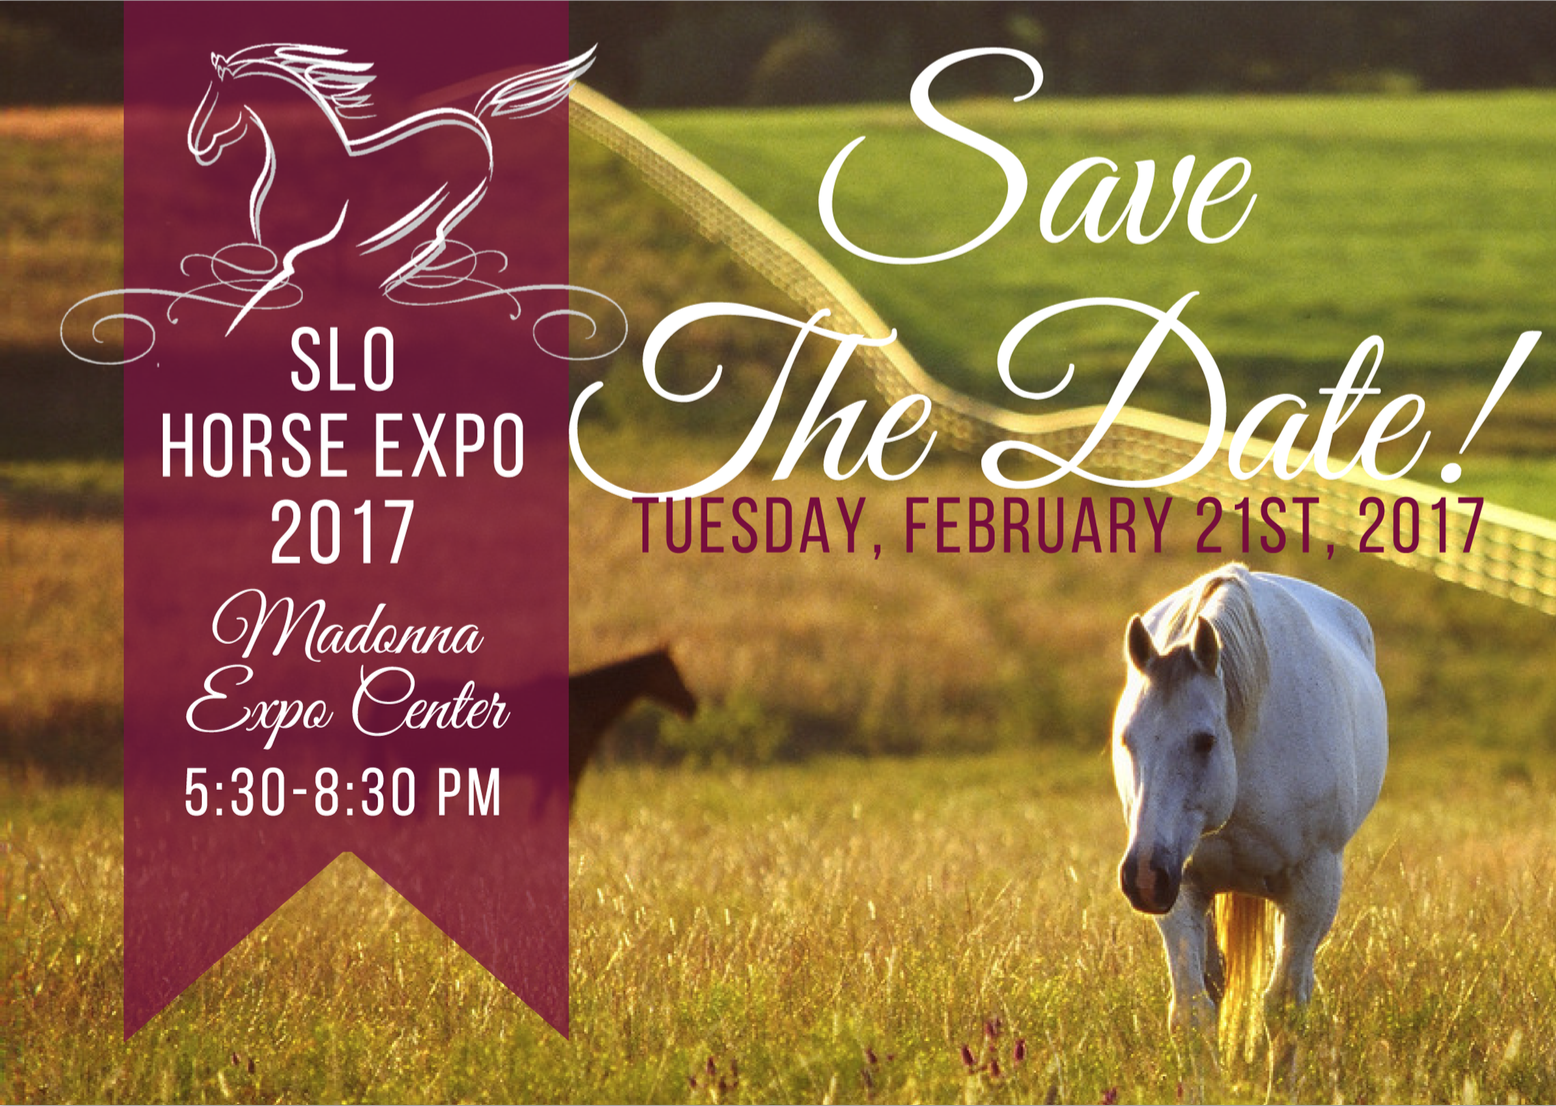 Face-to-Face Time with Vets and Friends: SLO Horse Expo | SLO Horse News